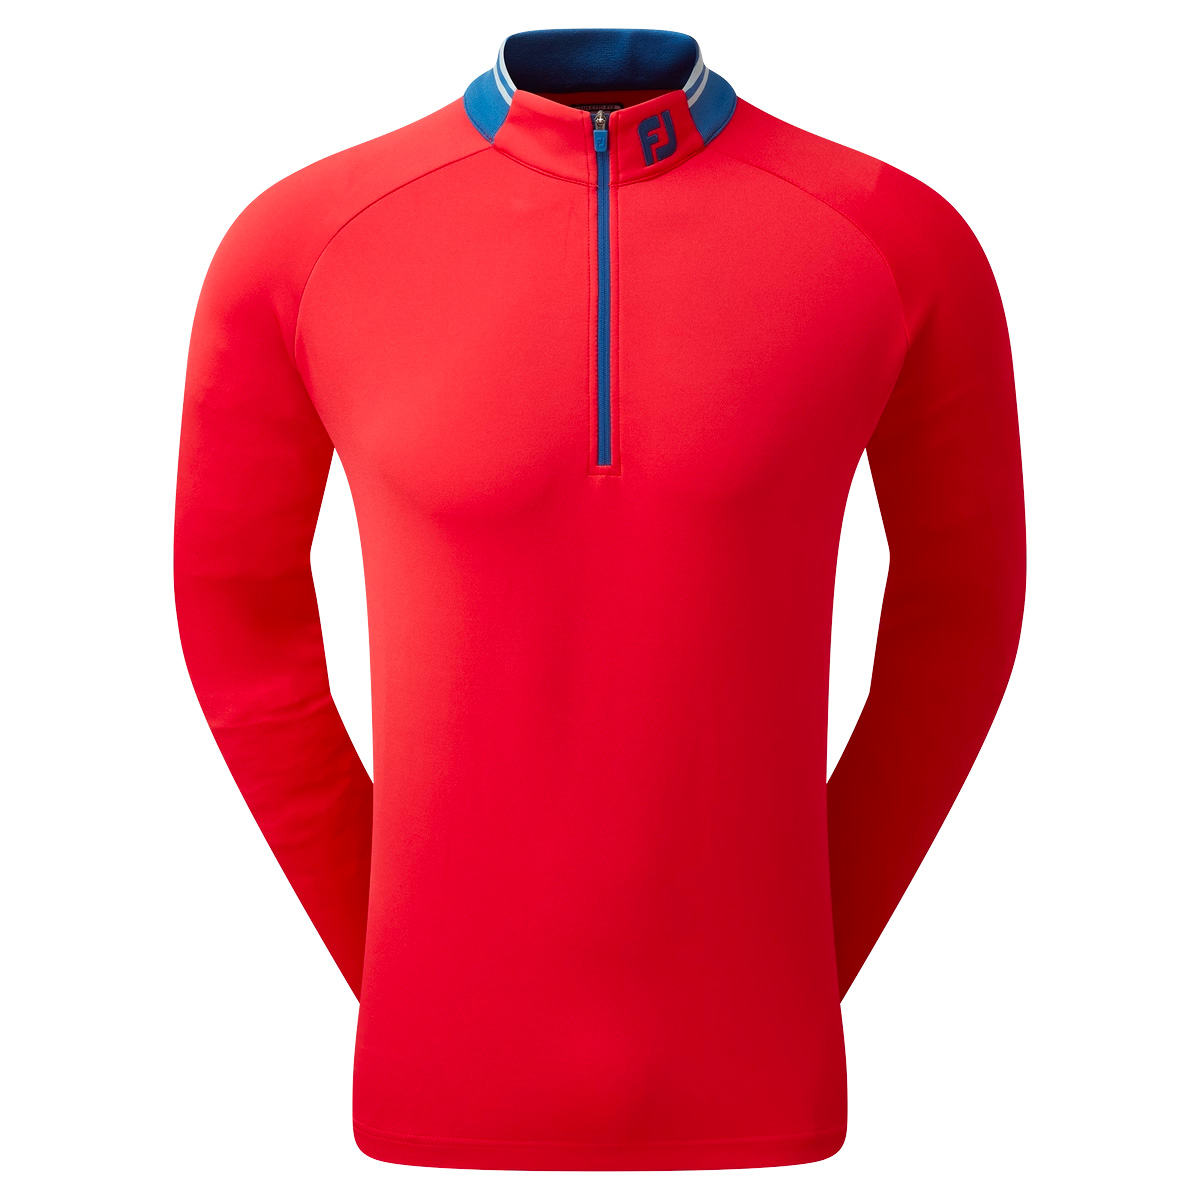 FootJoy Rib Trim Chill Out Mens Golf Pullover  - Red/Twilight